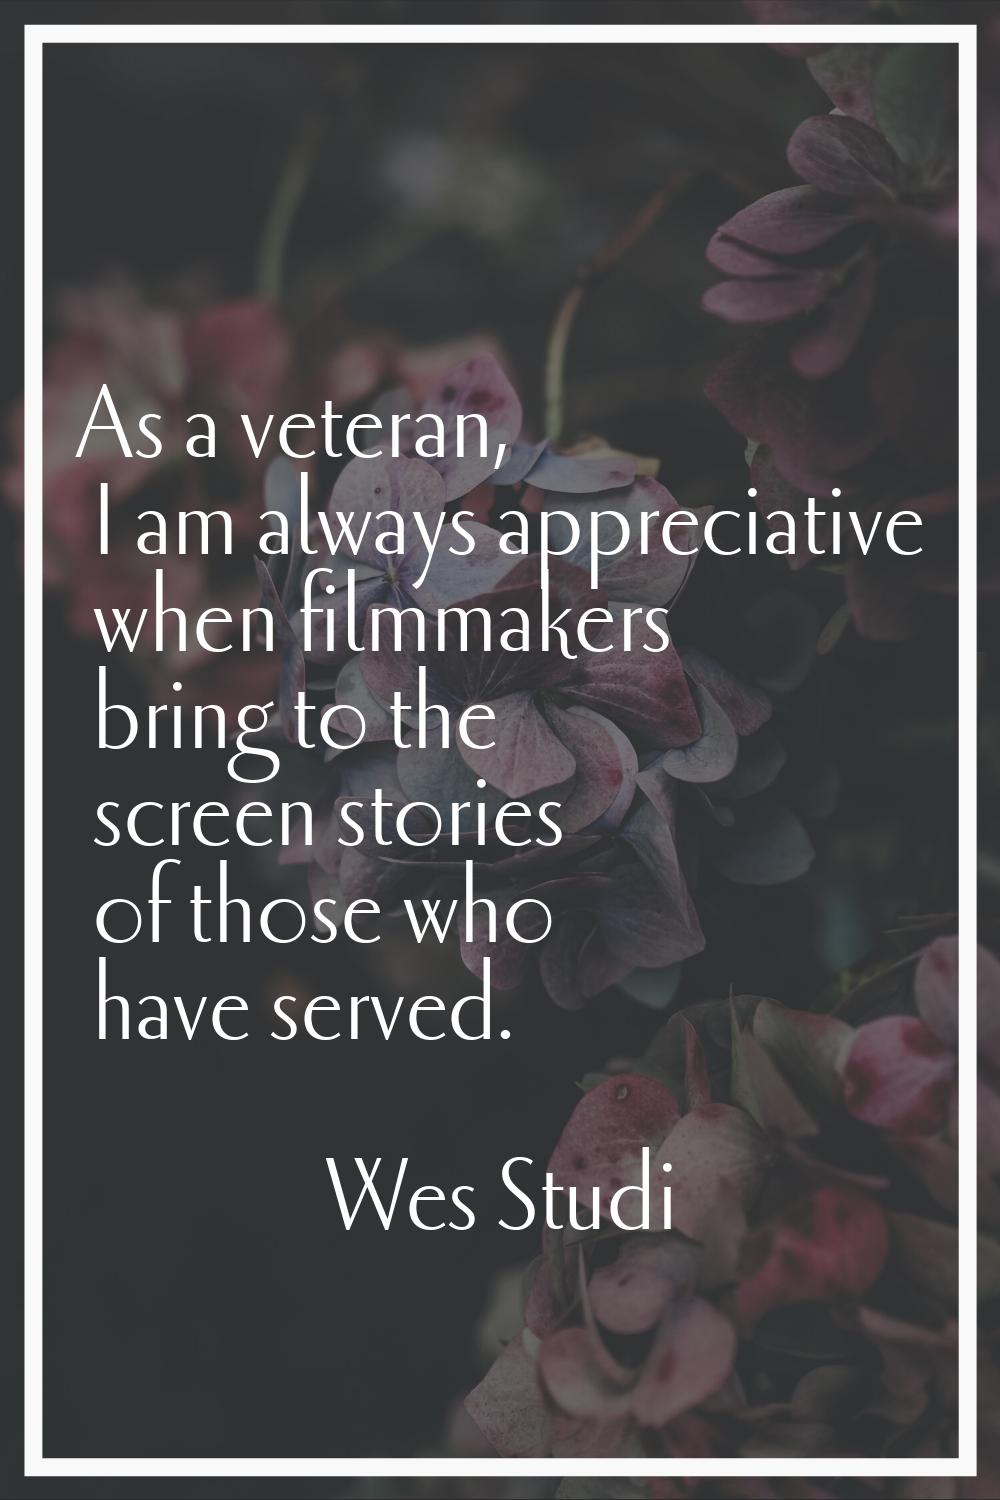 As a veteran, I am always appreciative when filmmakers bring to the screen stories of those who hav